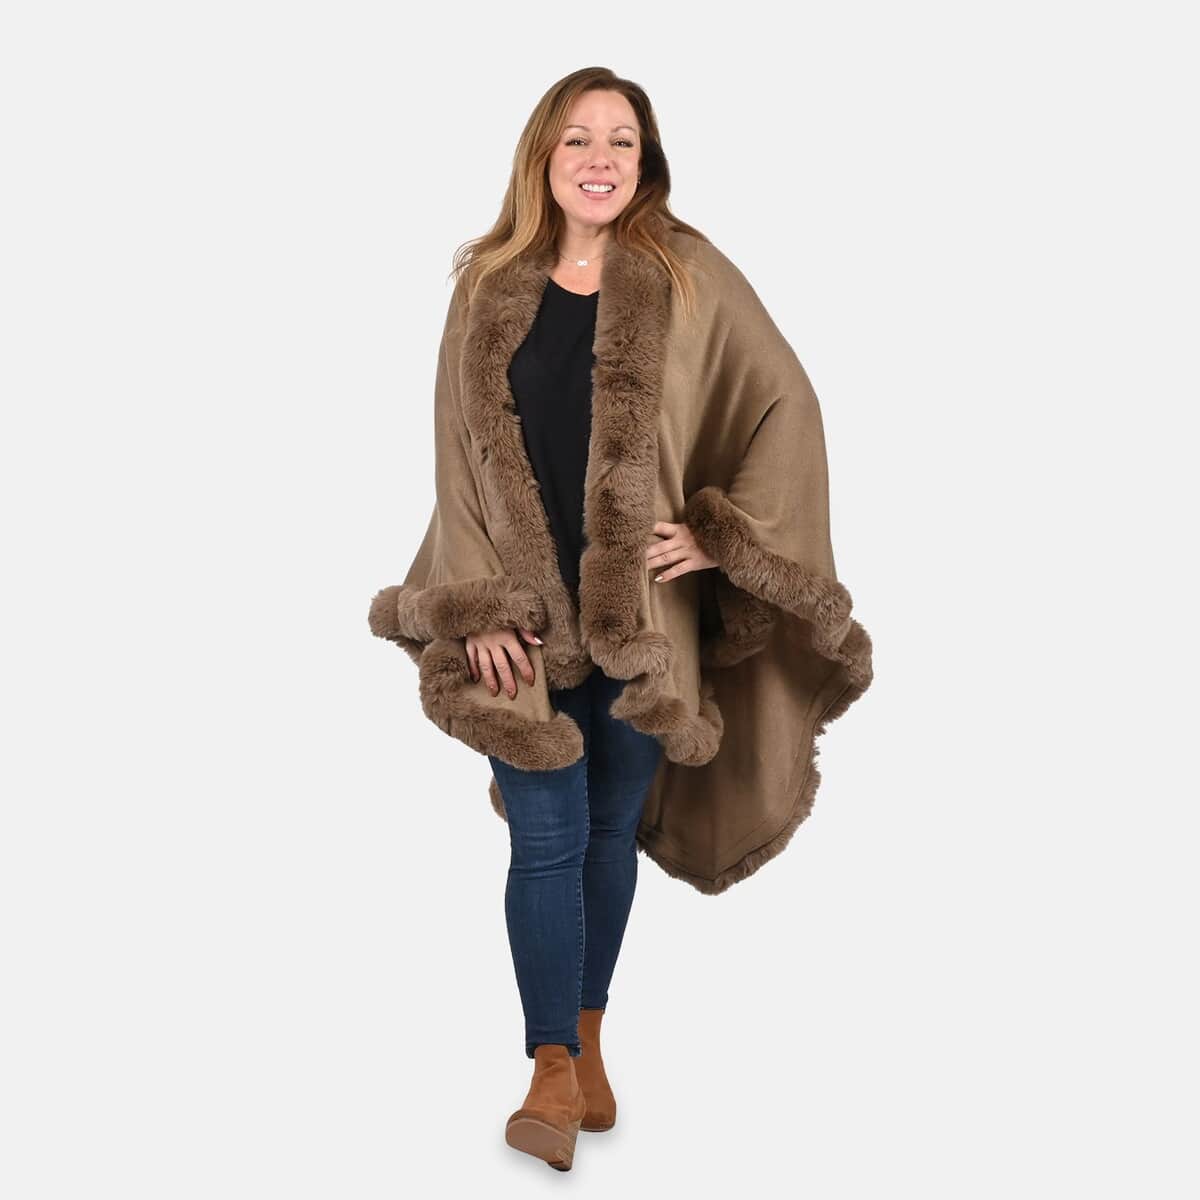 PASSAGE Beige Ruana with Faux Fur Trim - One Size Fits Most (31.5"x45.5") image number 0